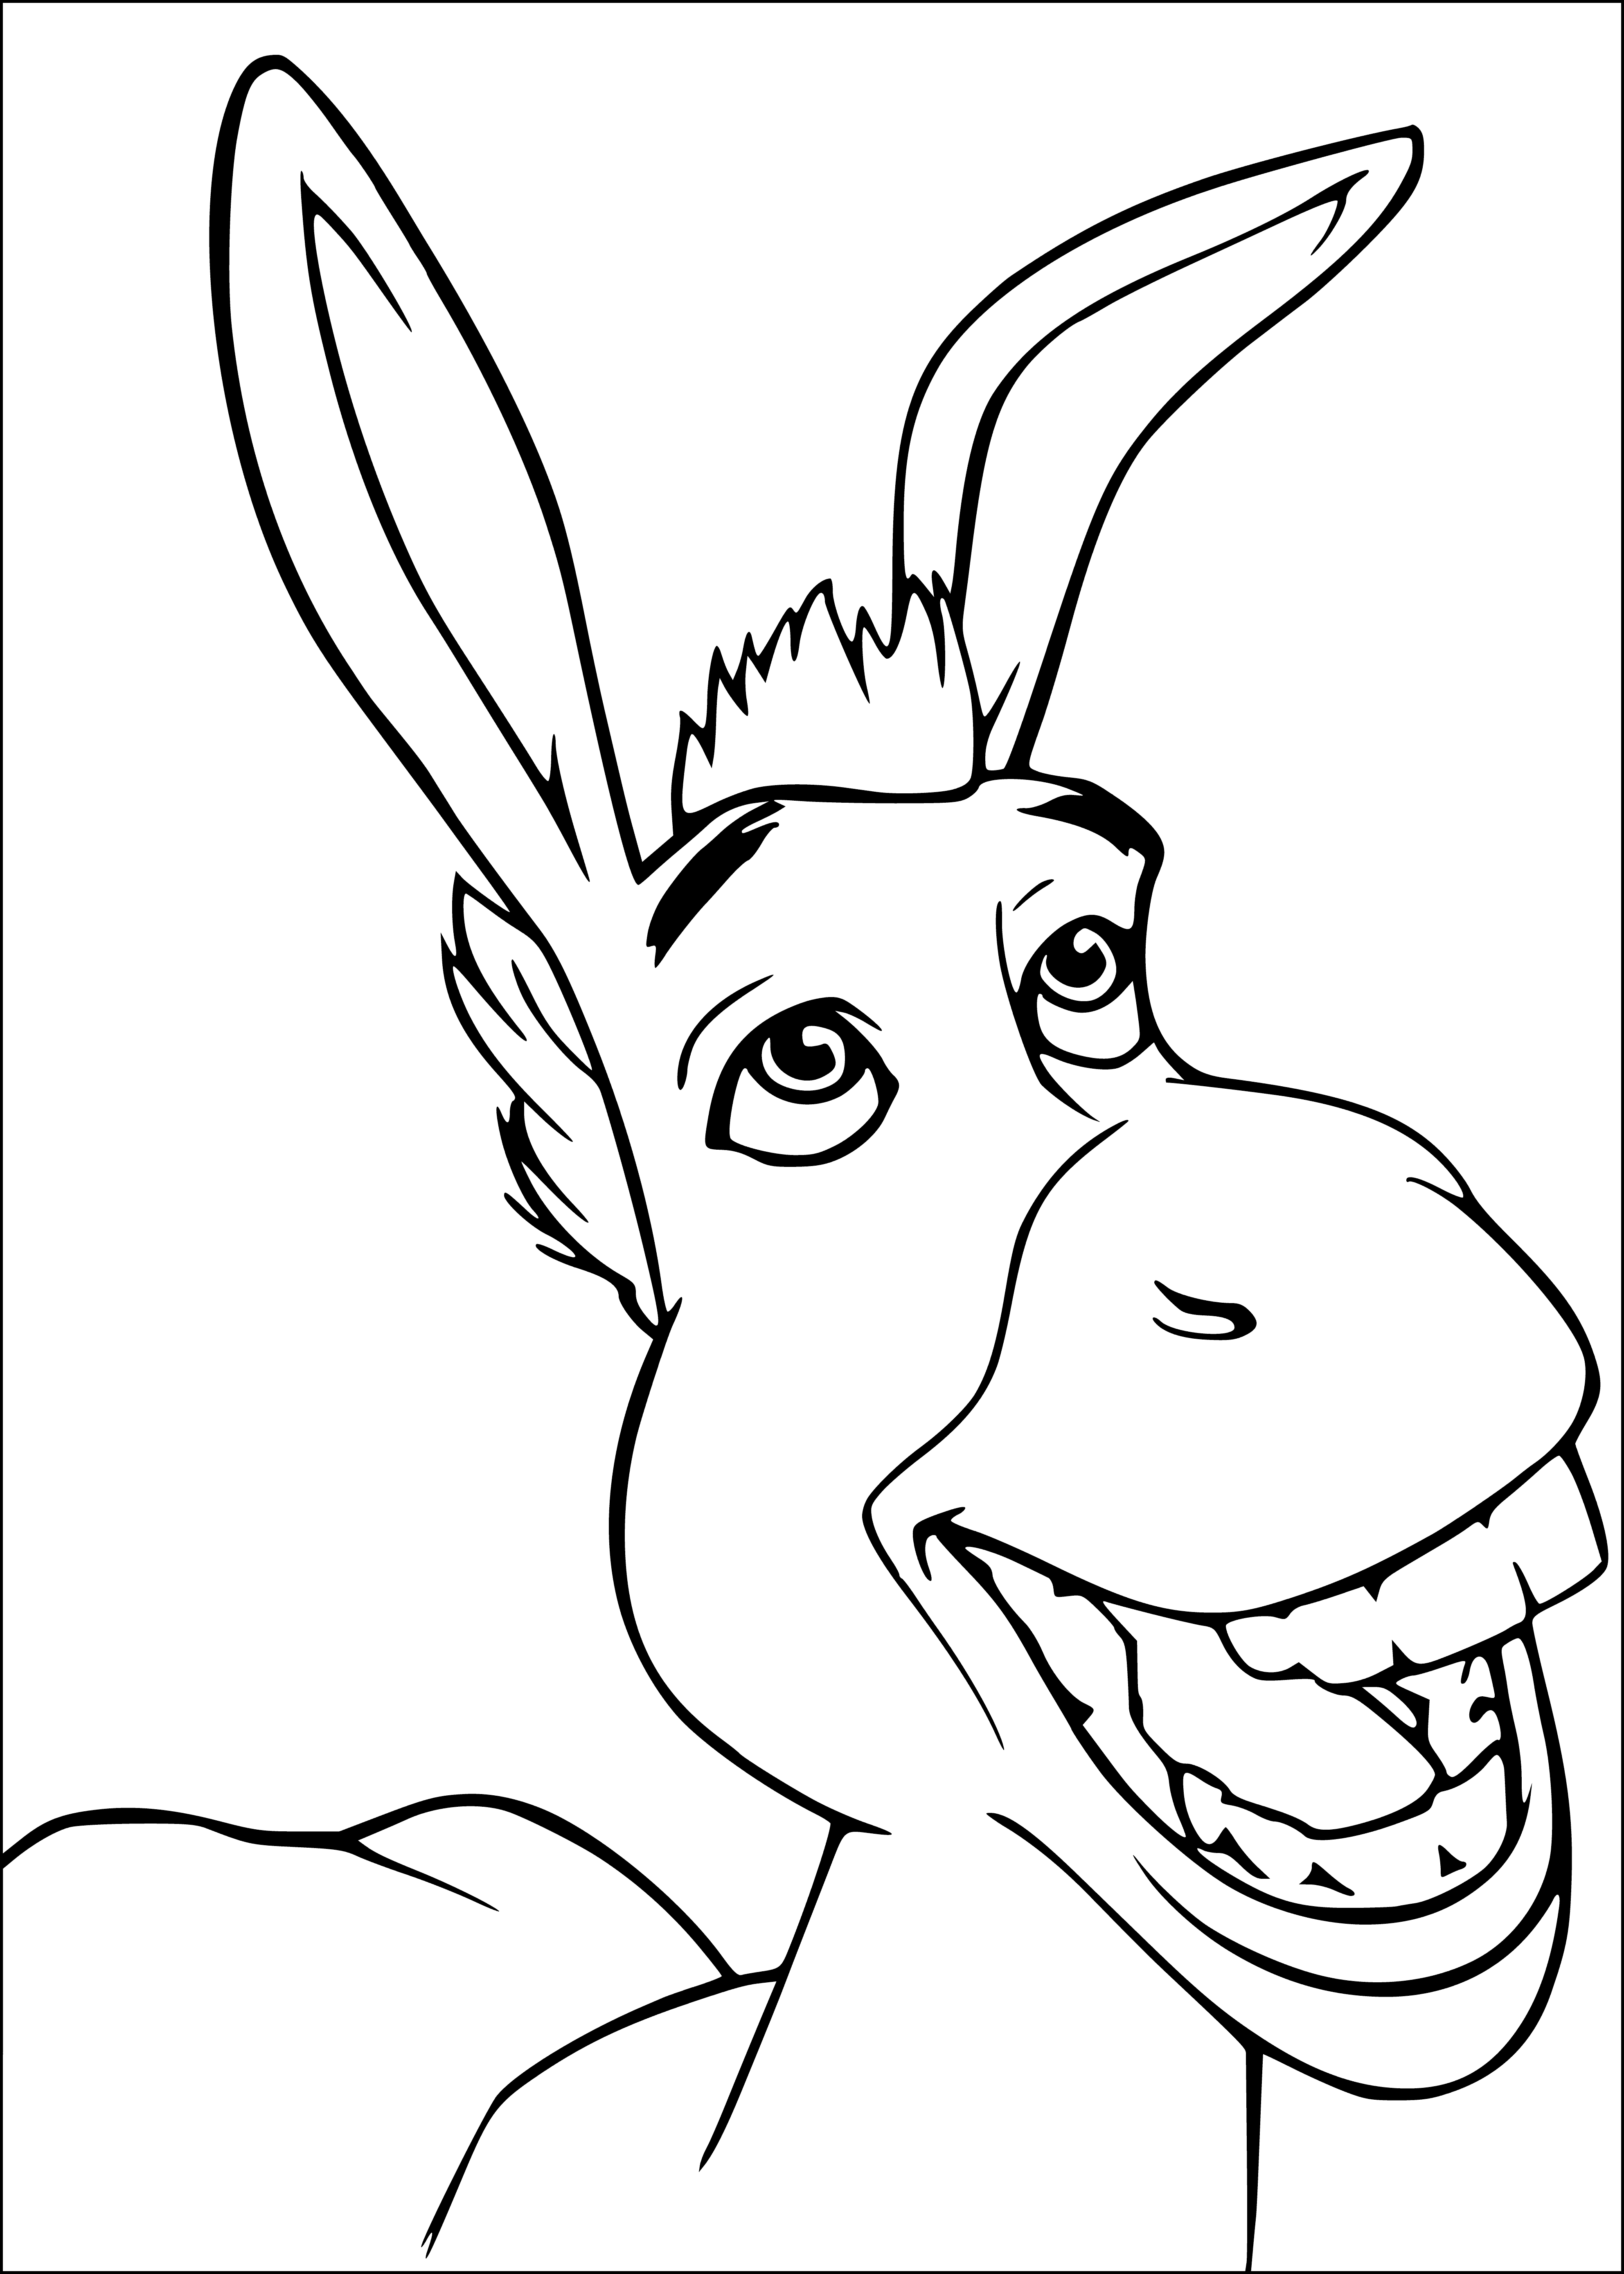 coloring page: Shrek is a green donkey with a red shirt and brown pants. He has big ears, a brown tail and a gold-buckled black belt.